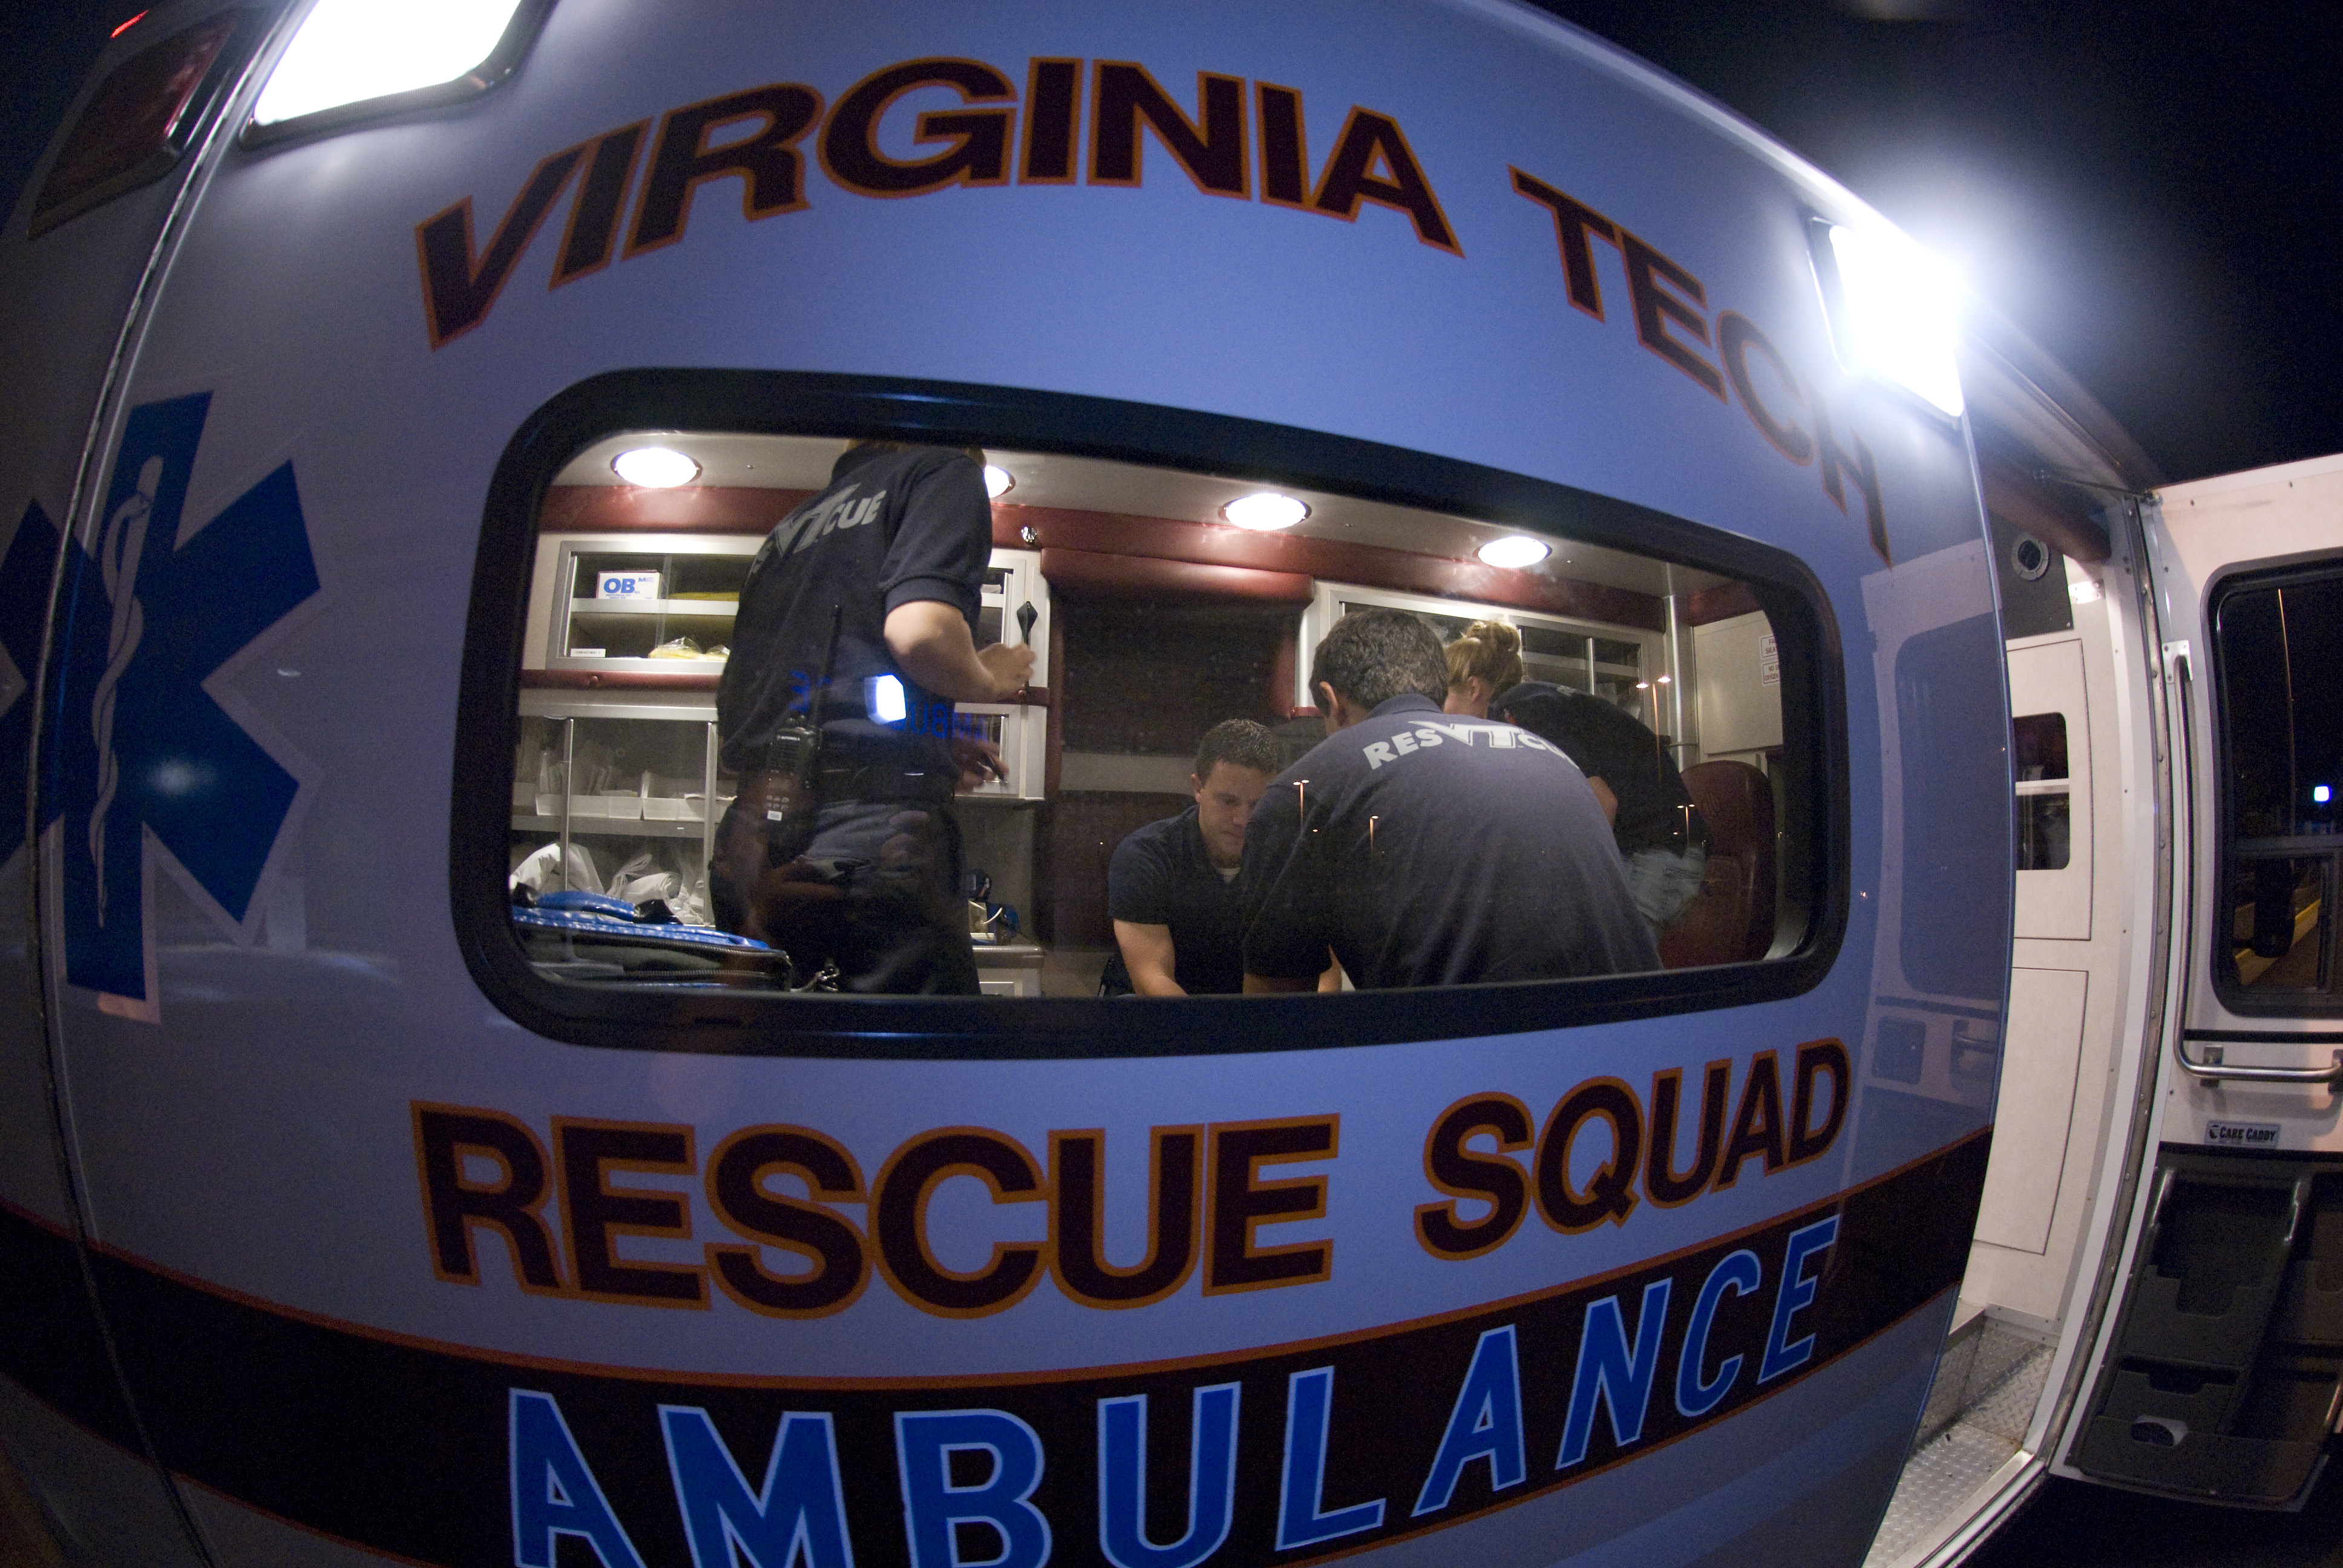 Rescue squad members in an ambulance